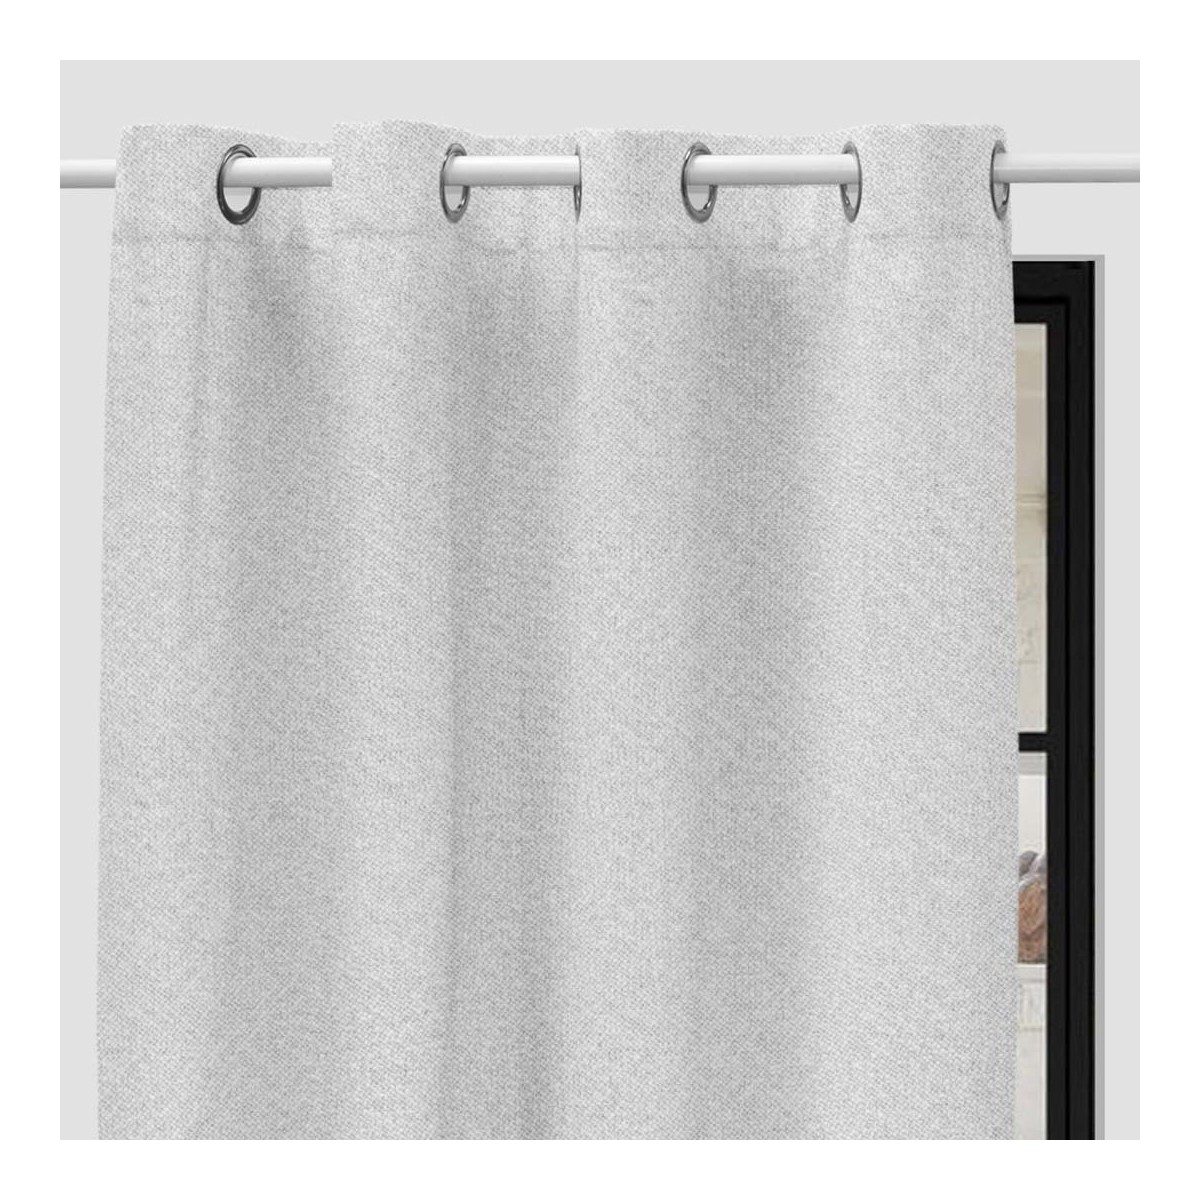 Home Curtains & blinds Soleil D'Ocre ECLIPSE White